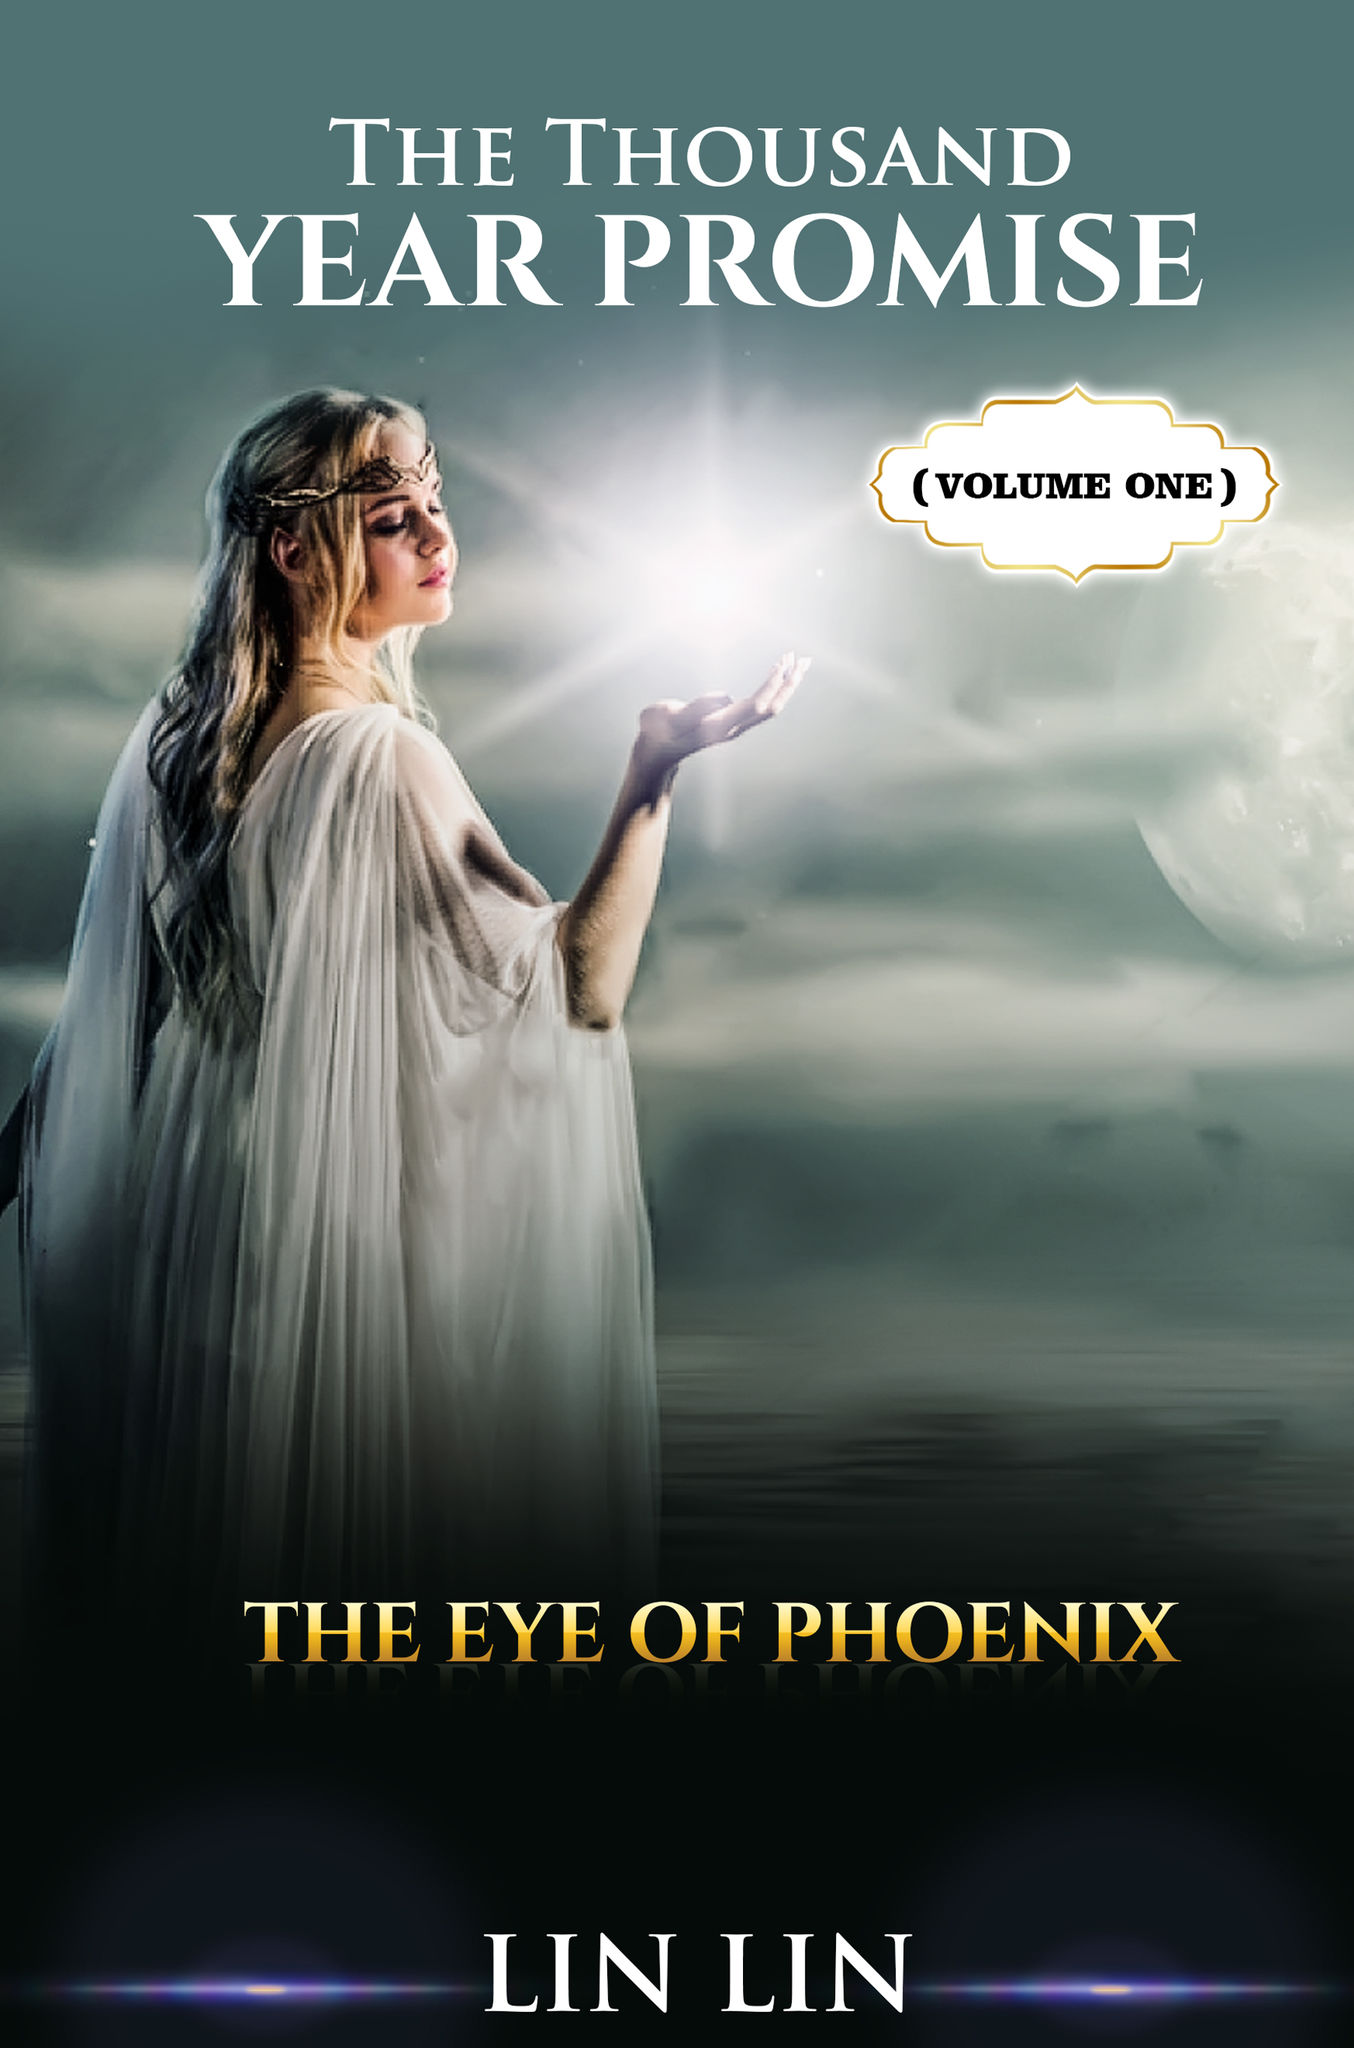 THE EYE OF PHOENIX (PART I OF A TRILOGY THE THOUSAND YEAR PROMISE)